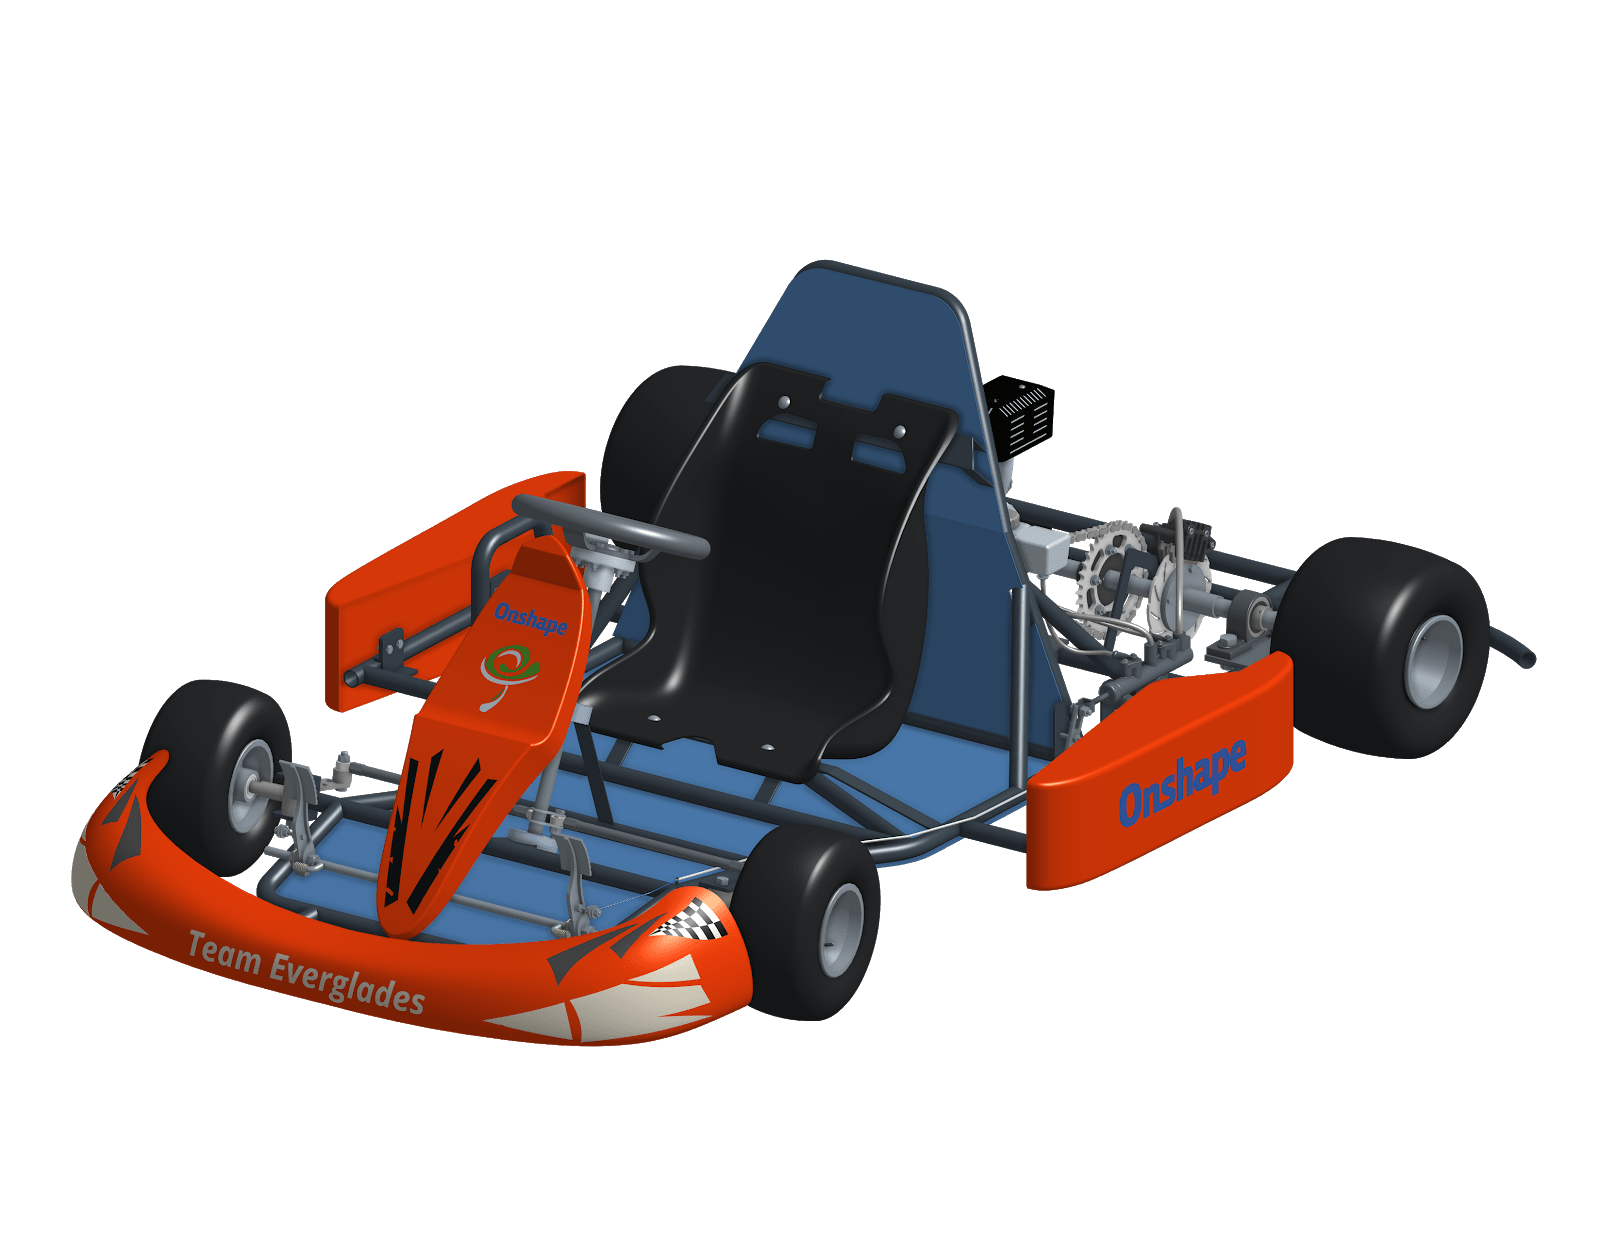 Screenshot of an Onshape CAD model of a go-kart designed by Everglades Technologies in India.